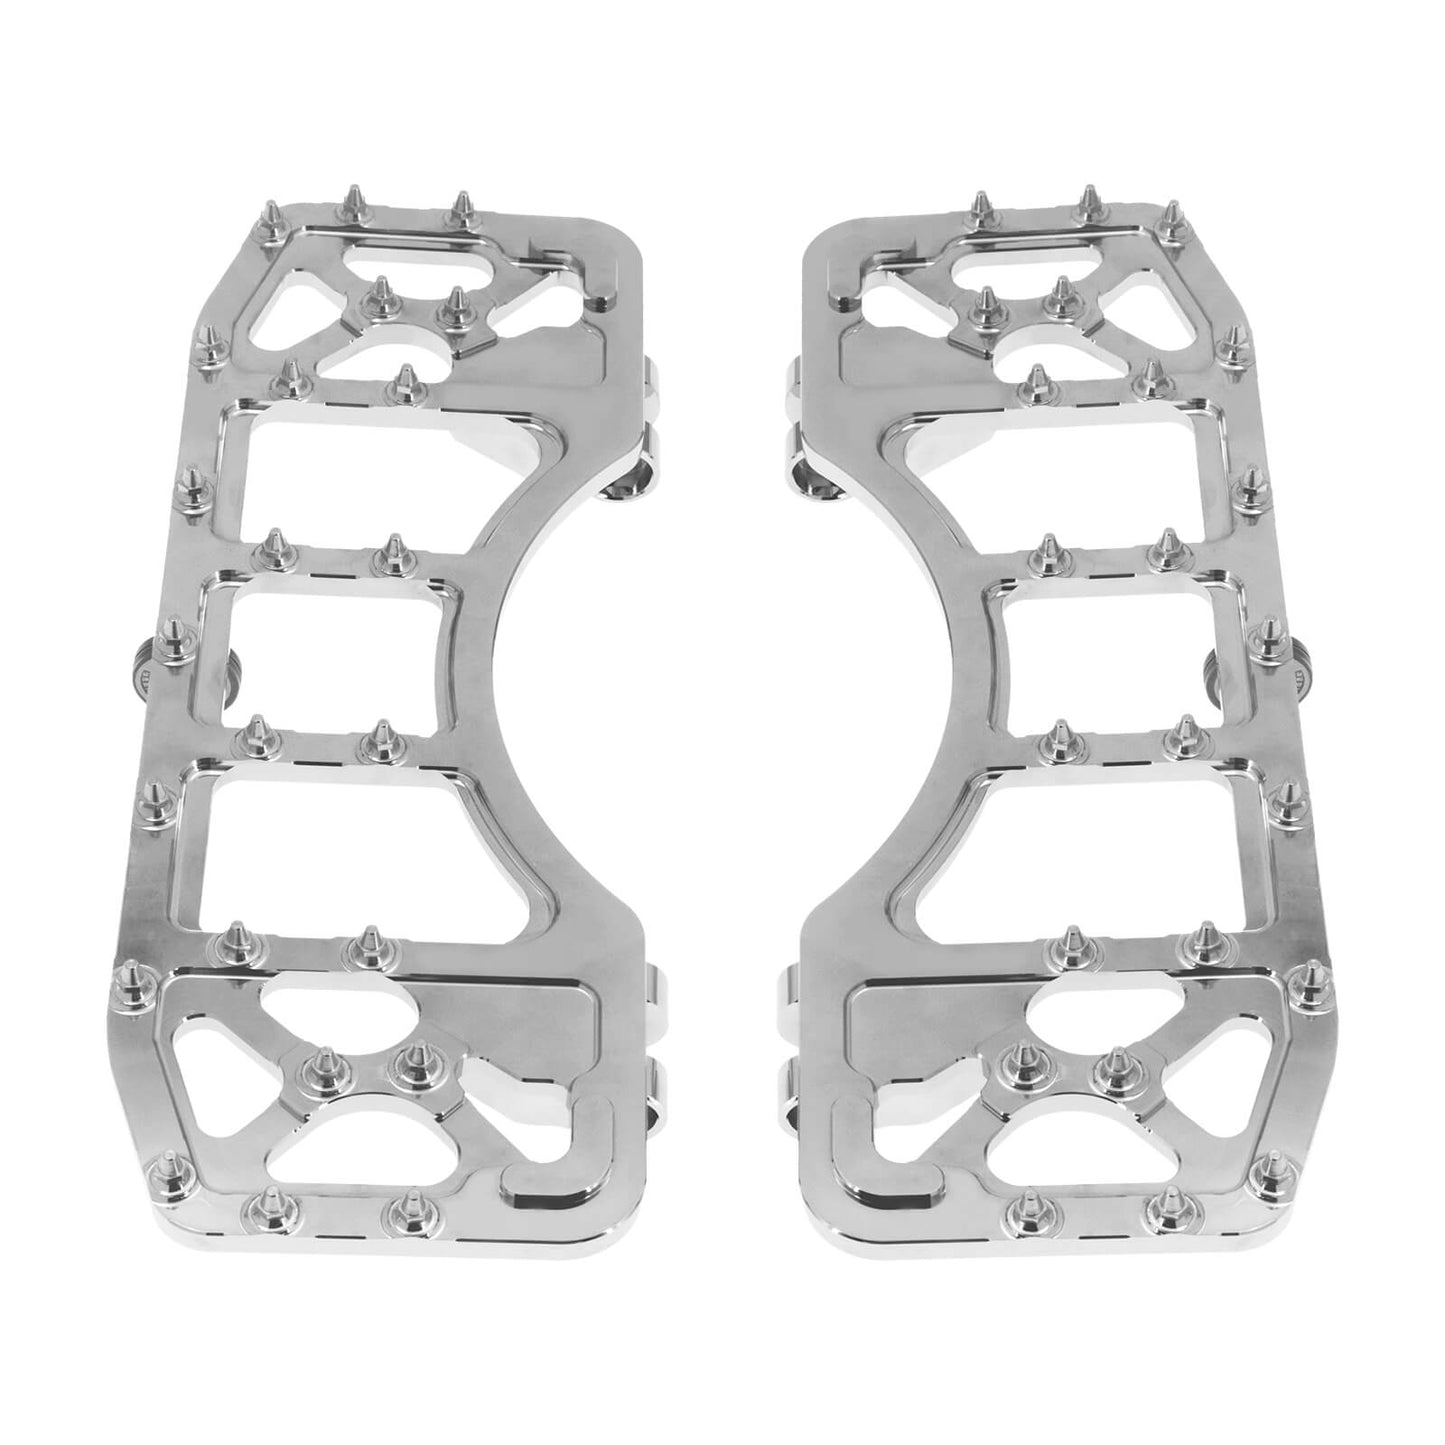 PE011302-rotating-floorboards-for-harley-motorcycle-chrome